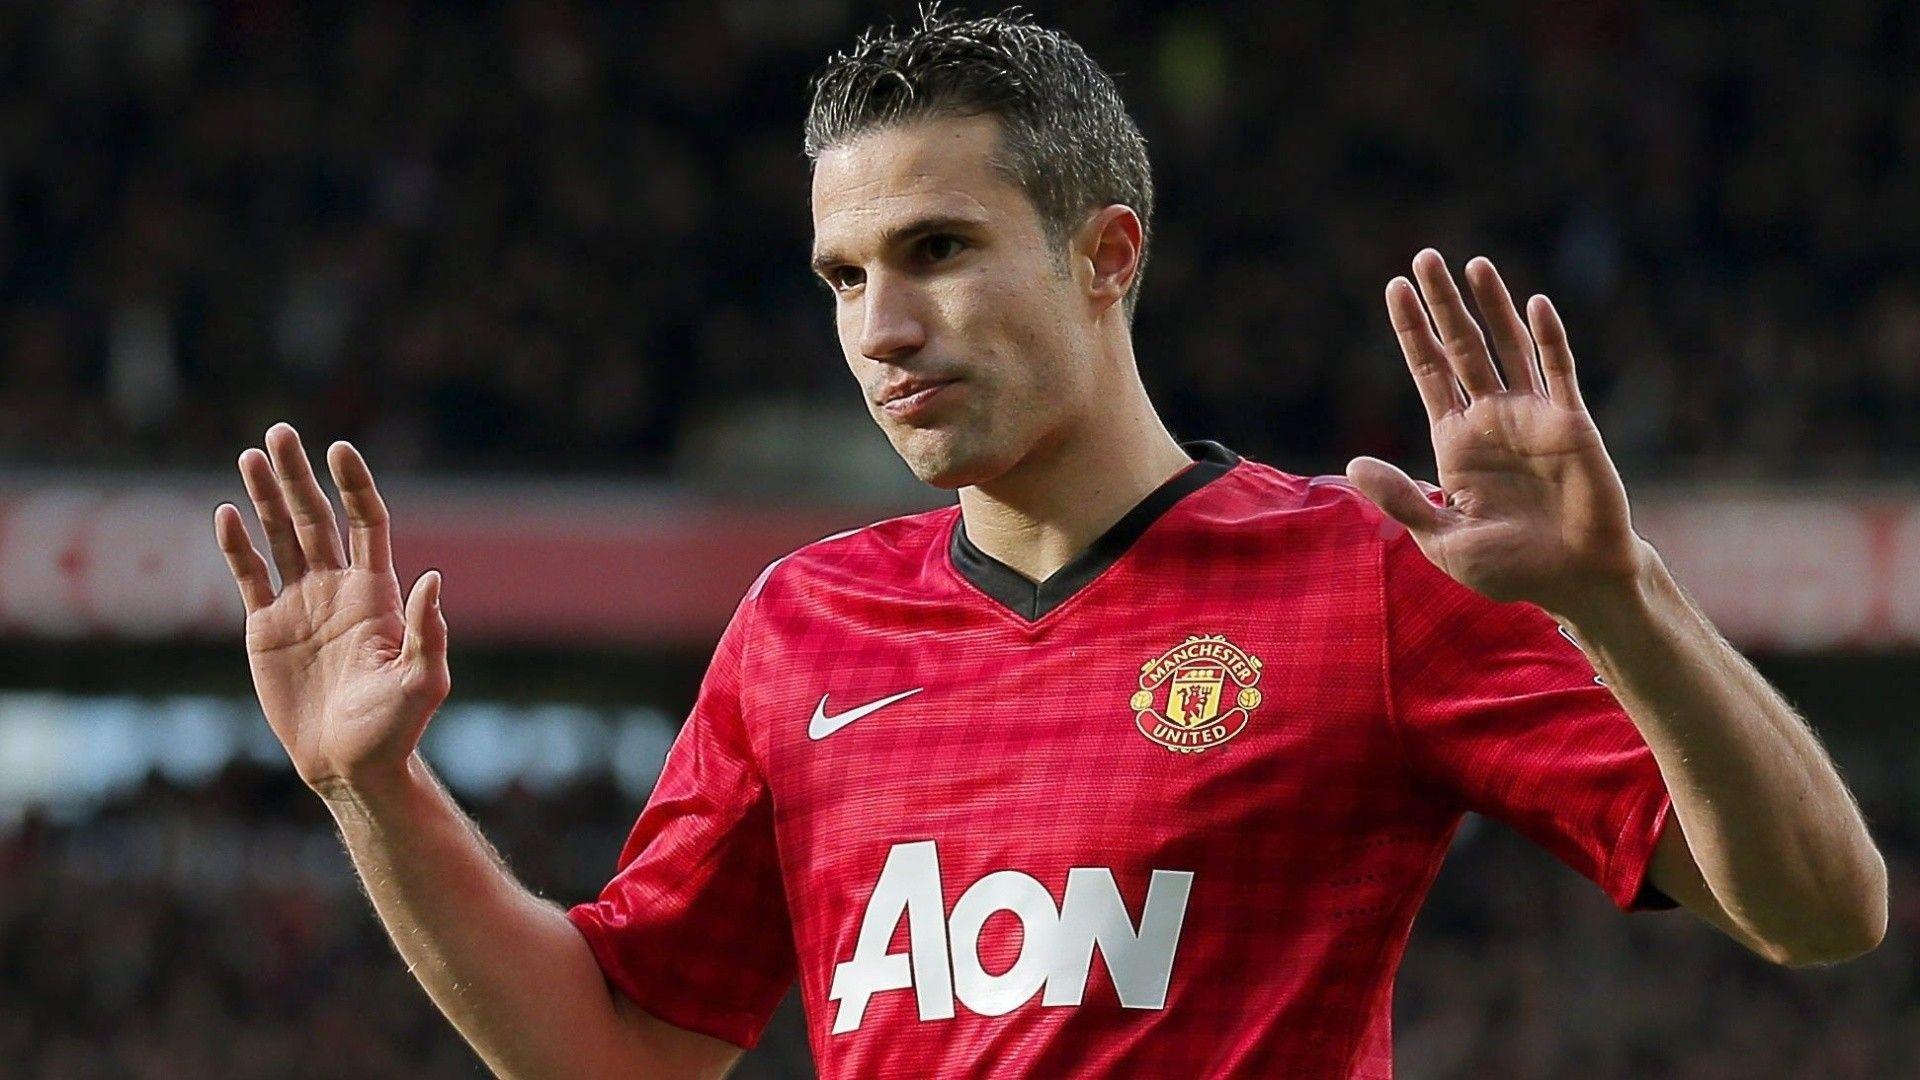 The attacker player of Manchester United Robin van Persie got a